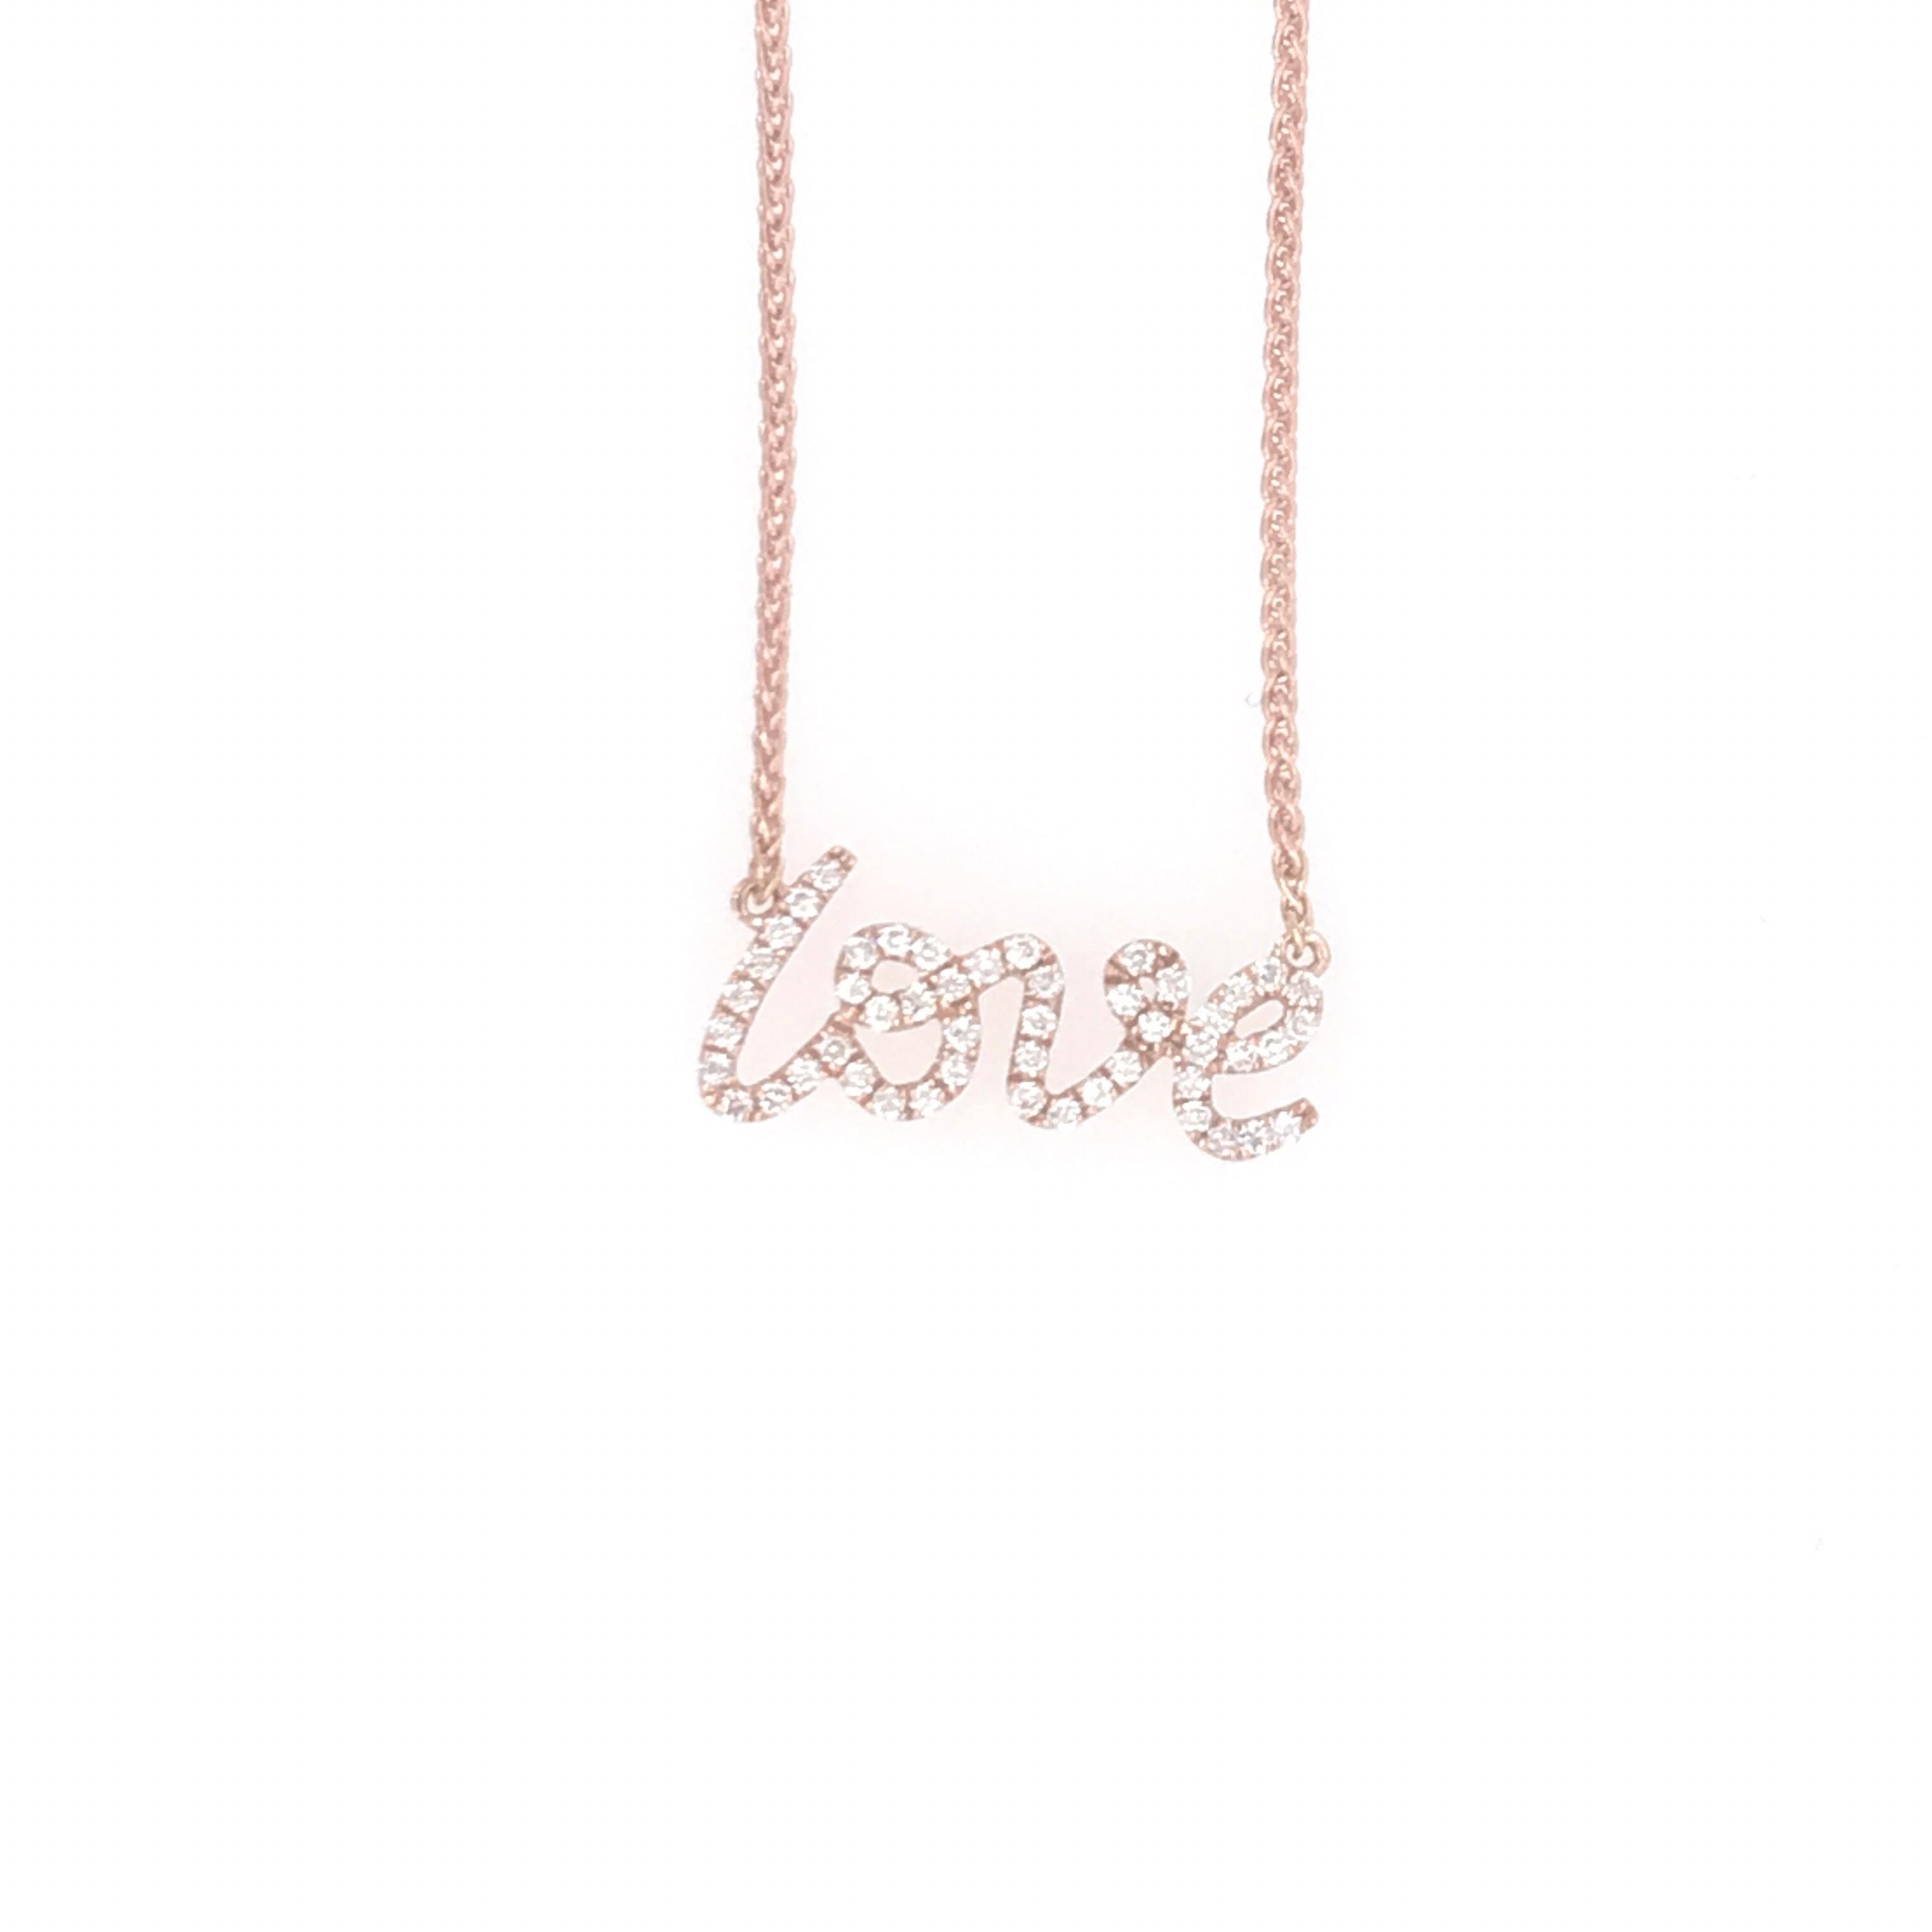 18K Rose Gold necklace featuring a diamond LOVE weighing 0.16 carats. 
2.3 grams
Great for layering!
